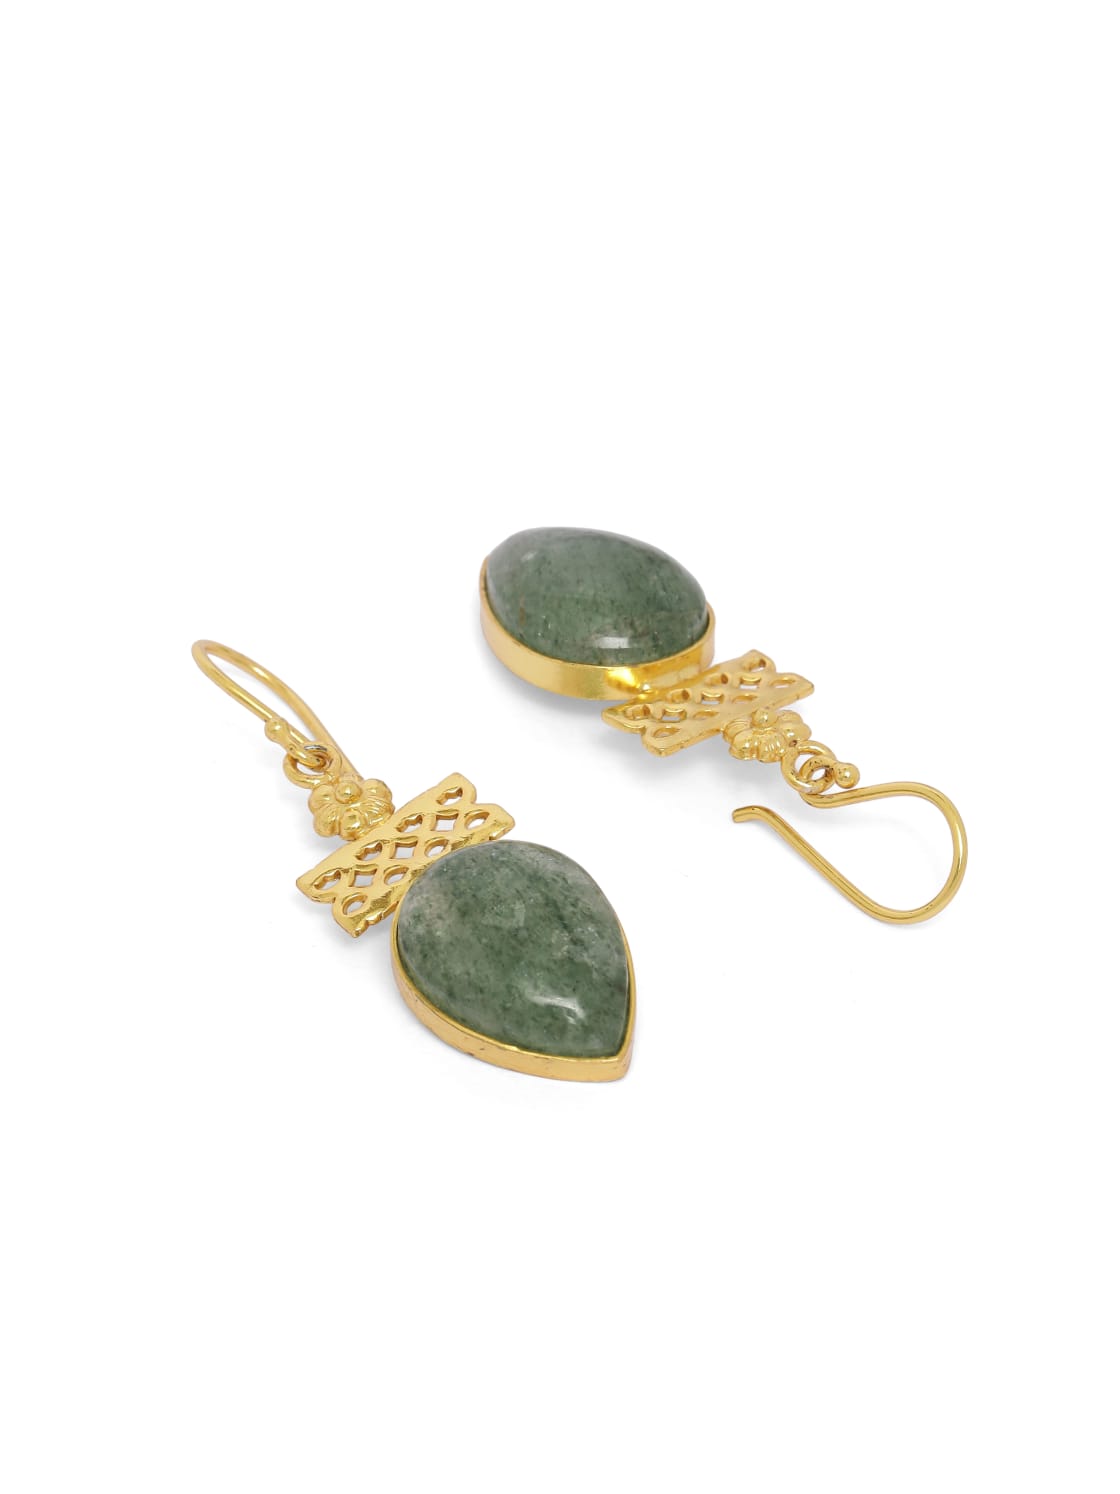 92.5 sterling silver gold plated hook earrings in Grapes Aventurine.